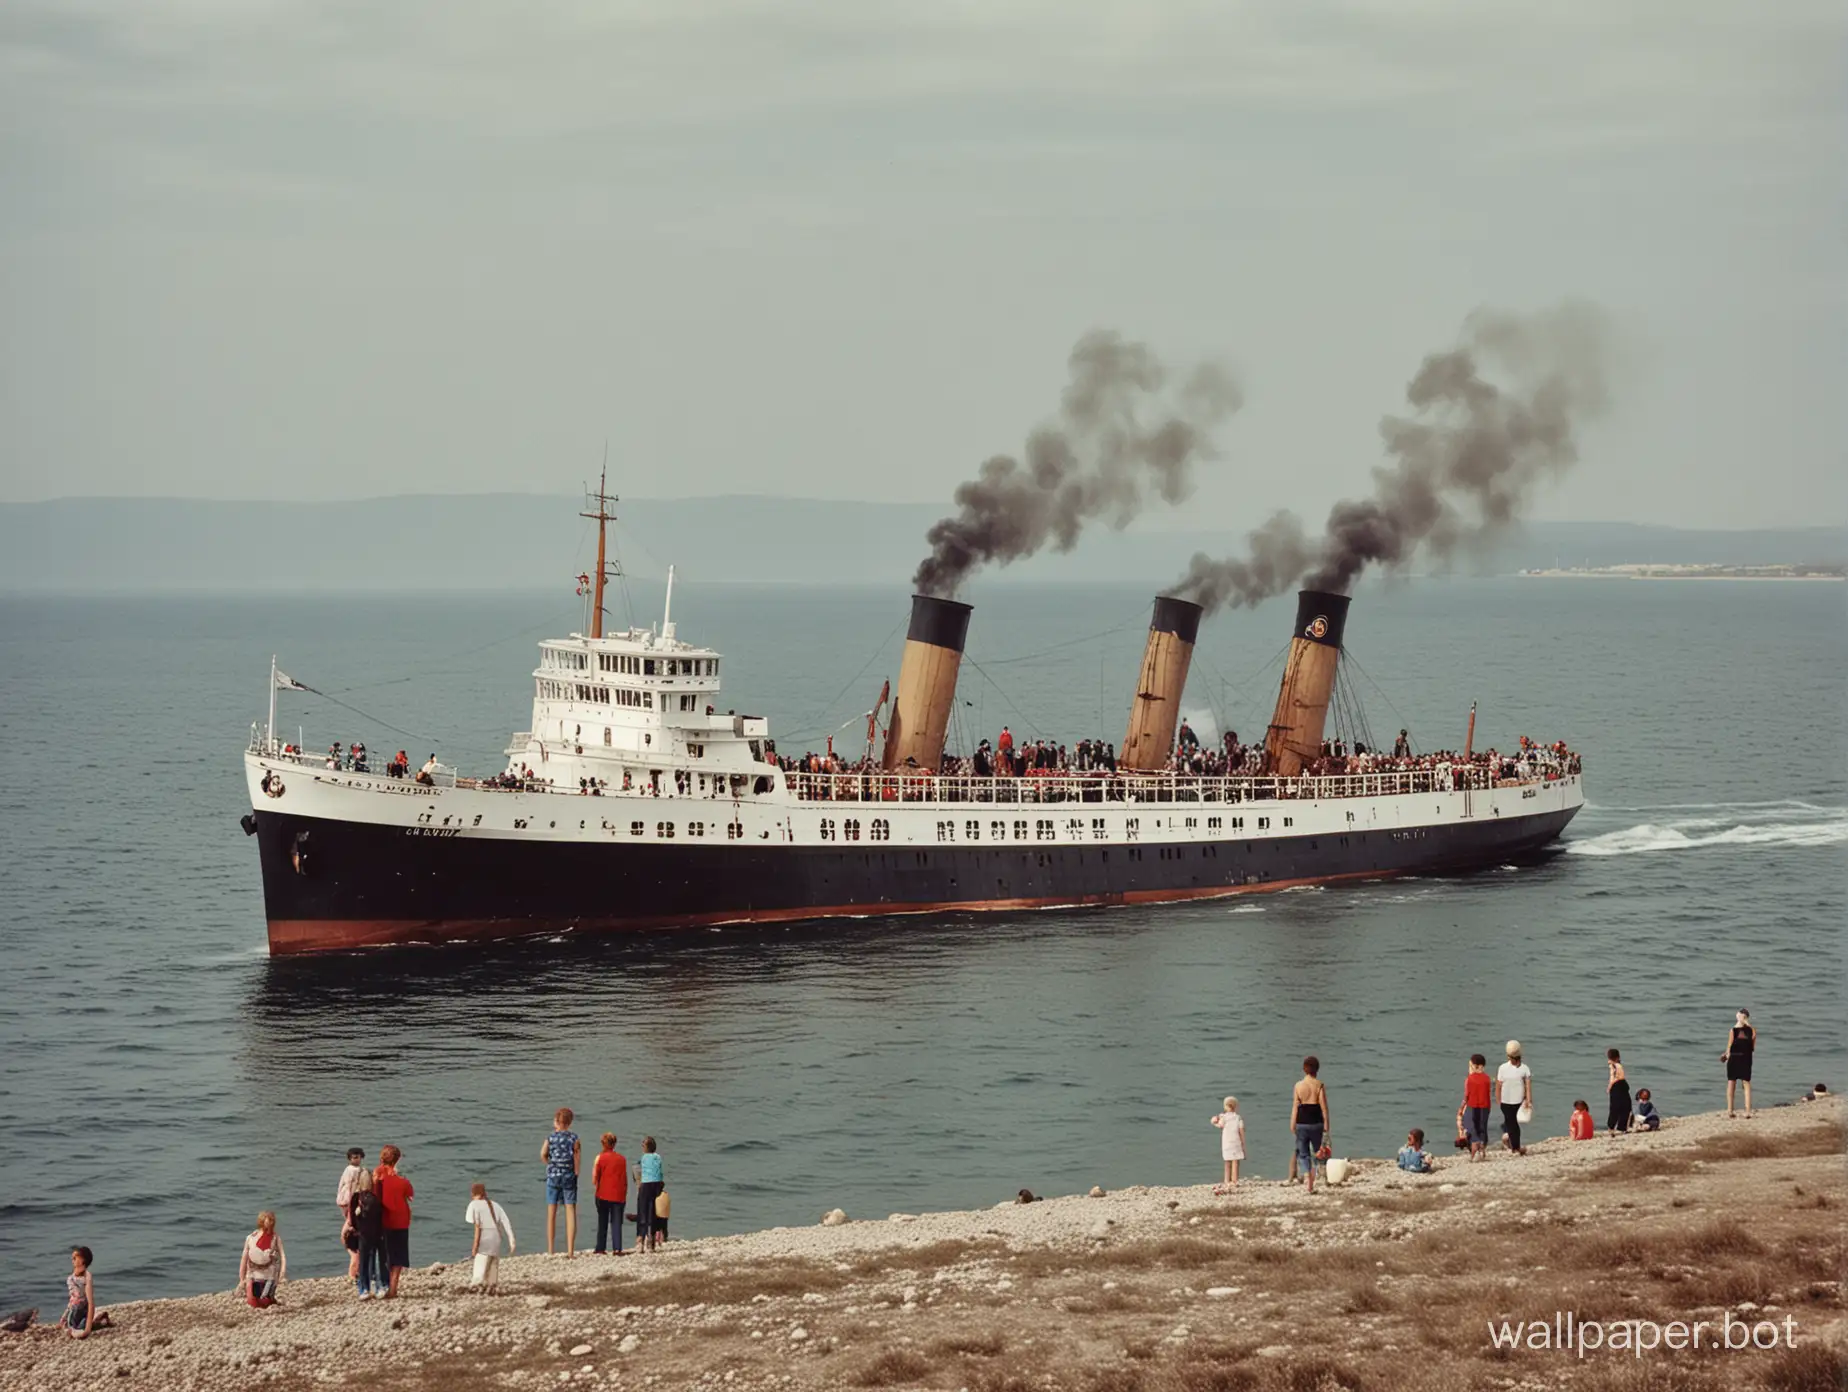 Children-Playing-on-a-Steamship-by-the-Crimean-Sea